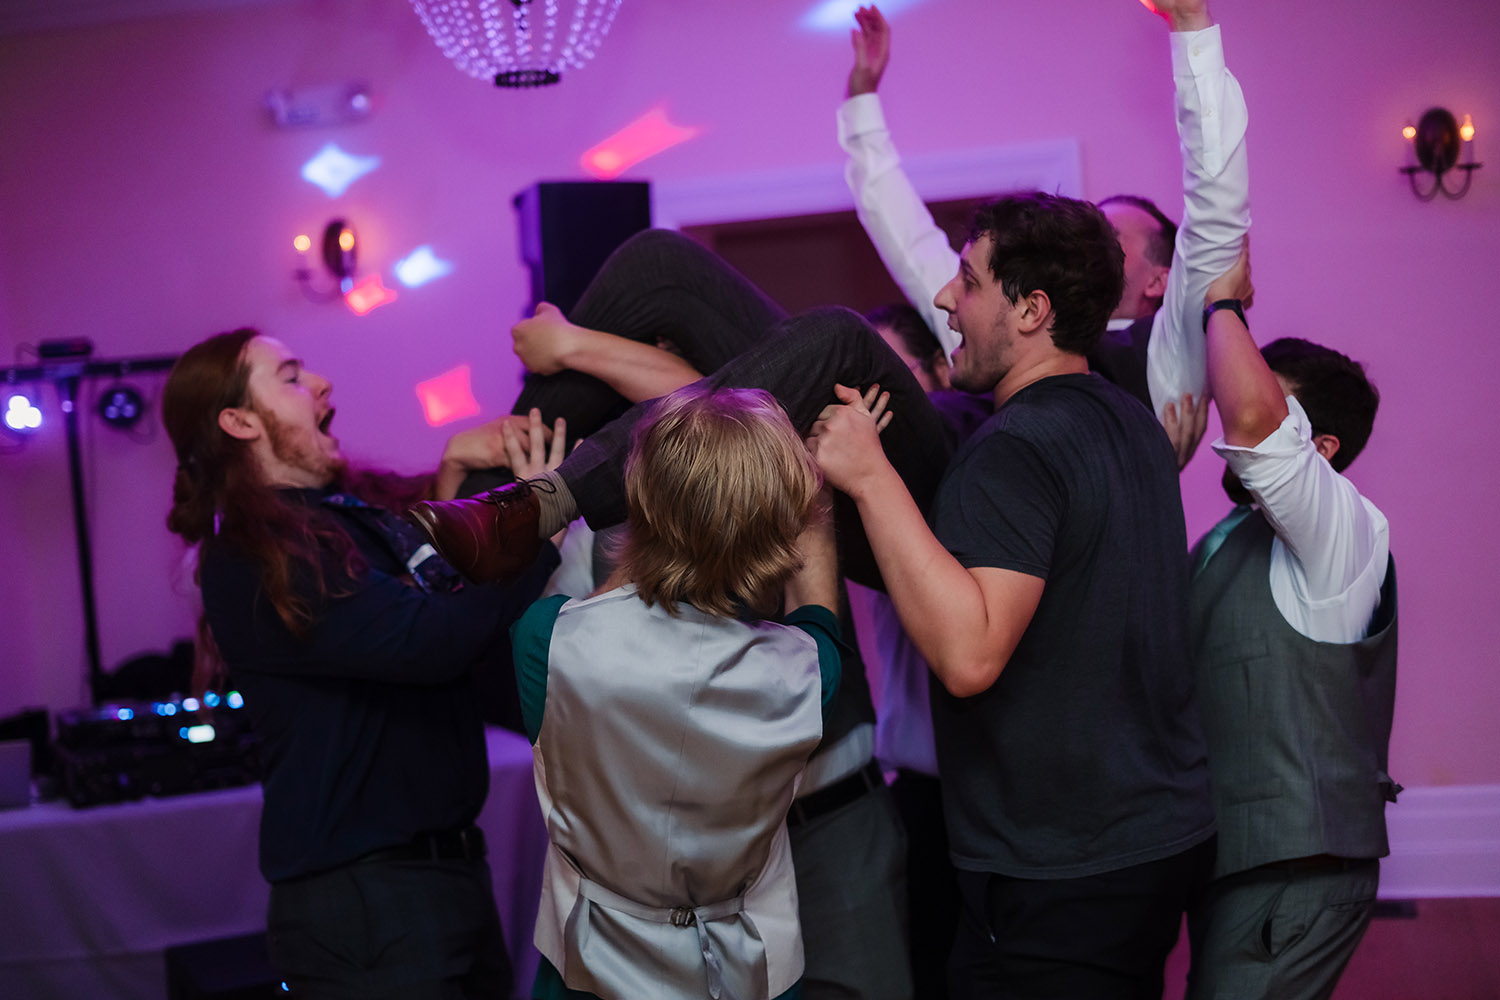 Groom lifted into the air during the reception at Wilder Mansion in Elmhurst, IL